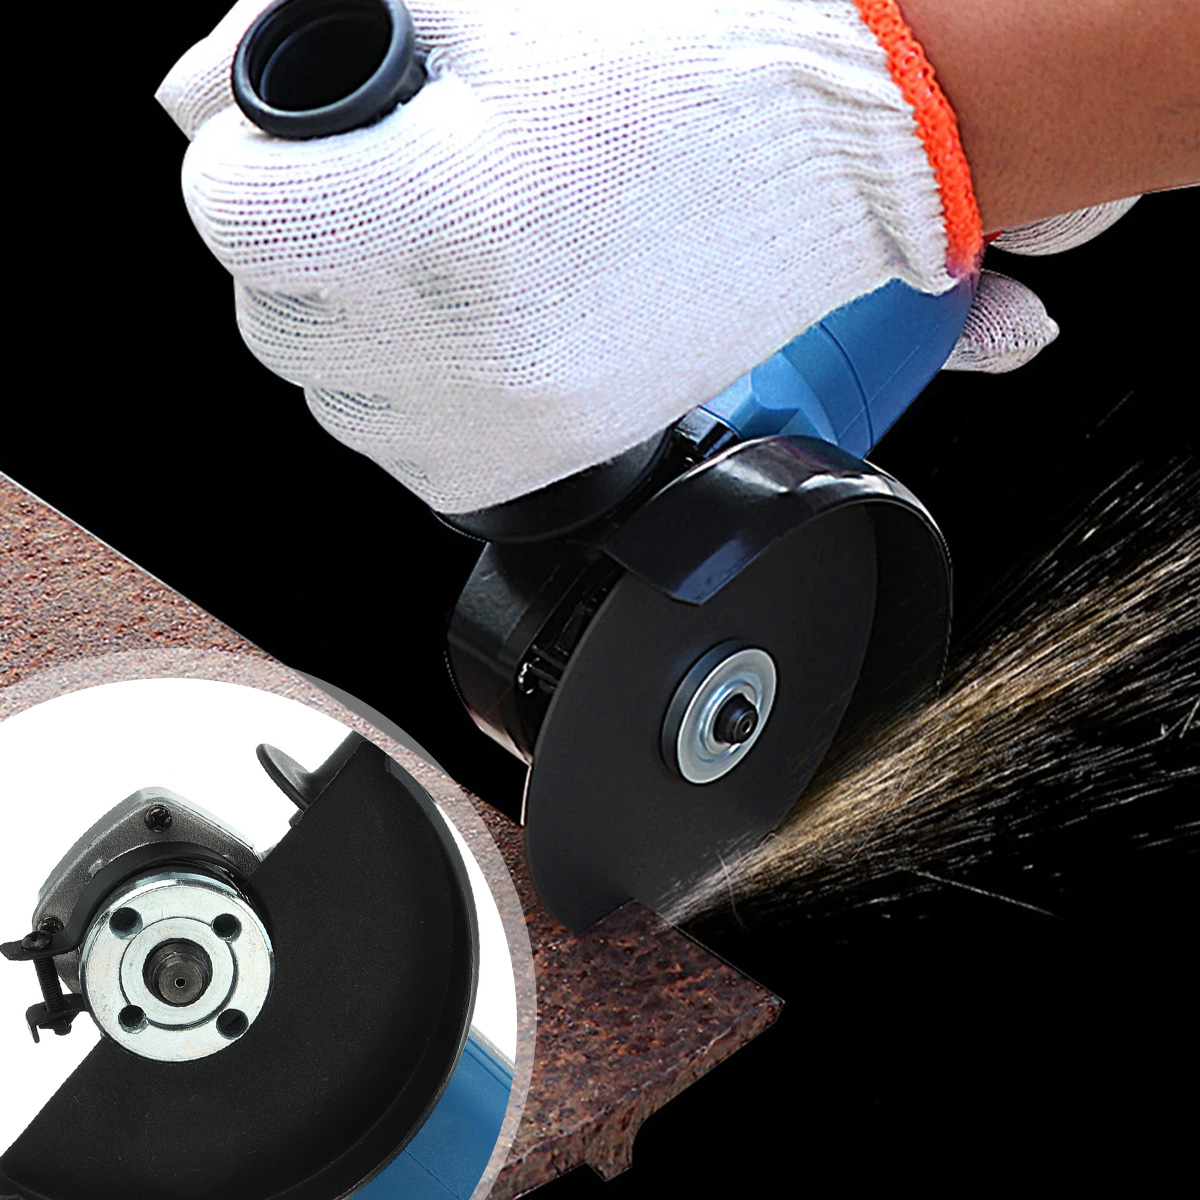 VIOLEWORKS-588VF-125mm-Cordless-Angle-Grinder-Cordless-Electric-Grinding-Cutting-Polishing-Tool-W-12-1847101-9